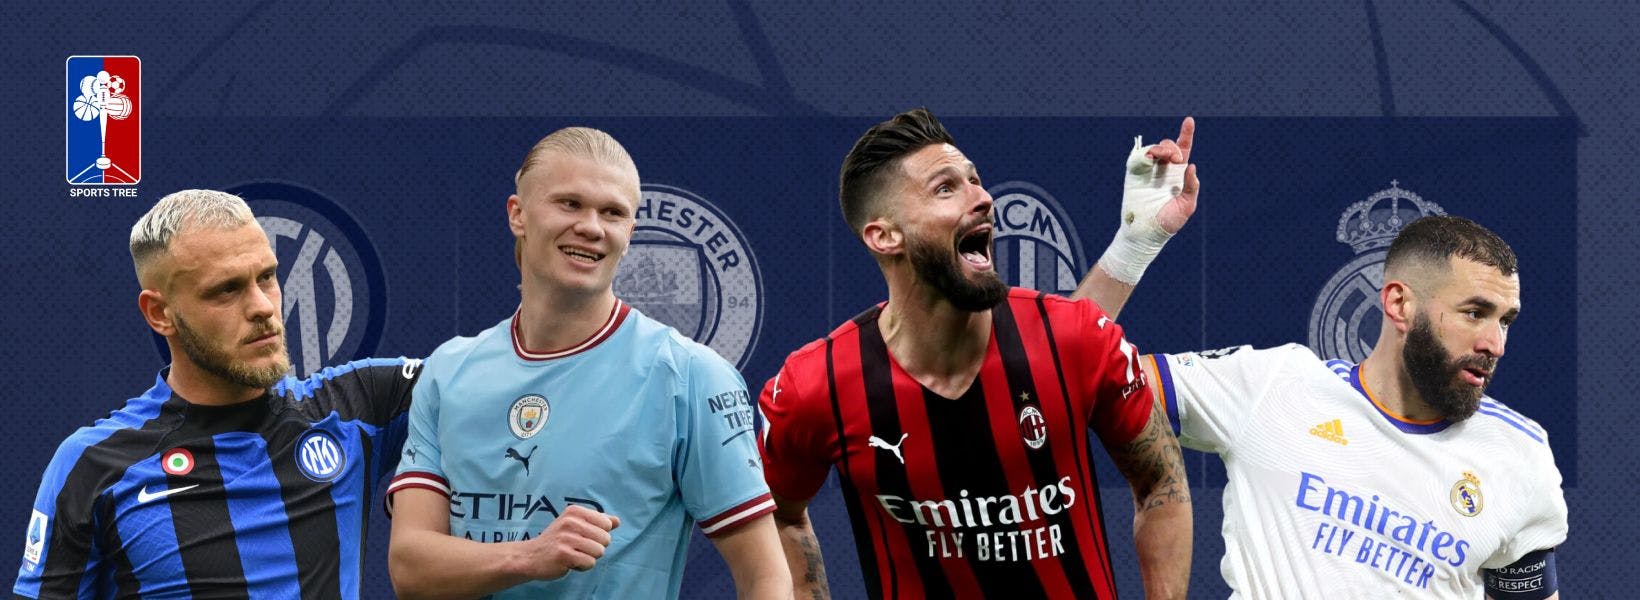 Erling Haaland of Manchester City, Karim Benzema of Real Madrid, Federico Dimarco of Inter Milan, and Olivier Giroud of AC Milan